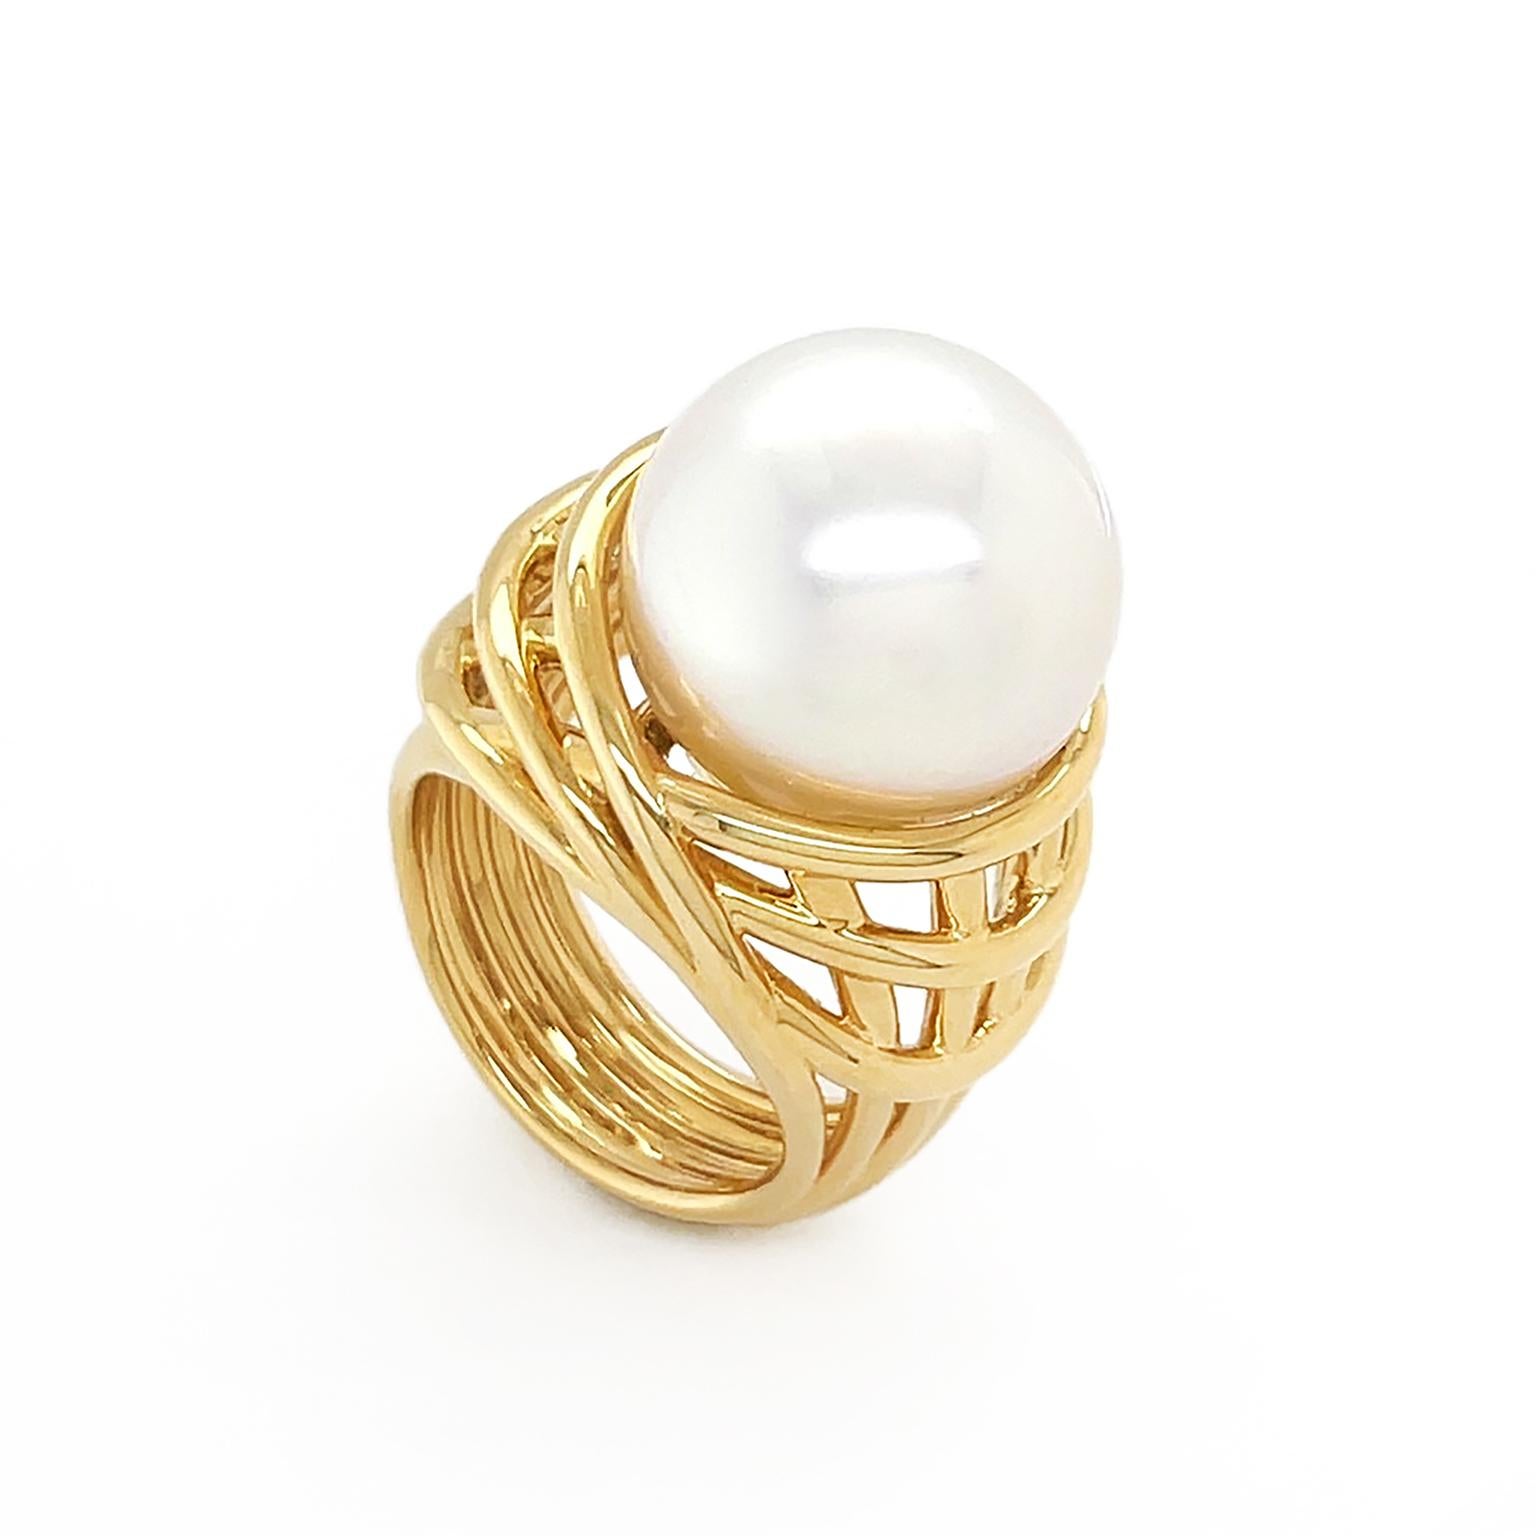 A white South Sea pearl is the apex of this ring. An 18k yellow gold shank of multiple bands intersect to fashion an openwork pattern to exalt the gem weighing 27.59 carats. The ring measures 0.94 inches (width) by 0.75 inches (length) by 1.41